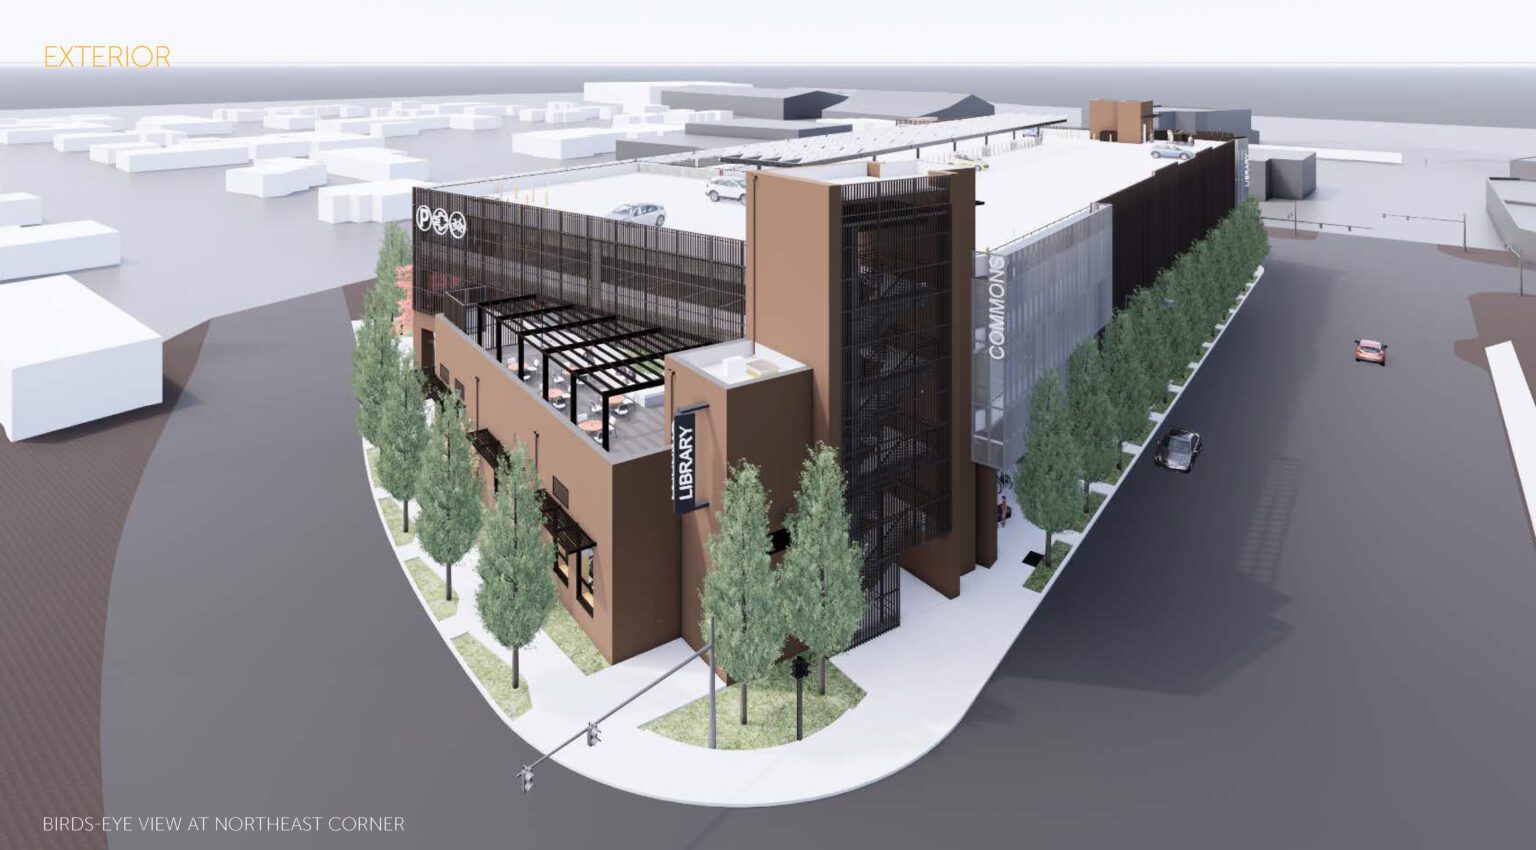 Mount Vernon will break ground this month on the Library Commons